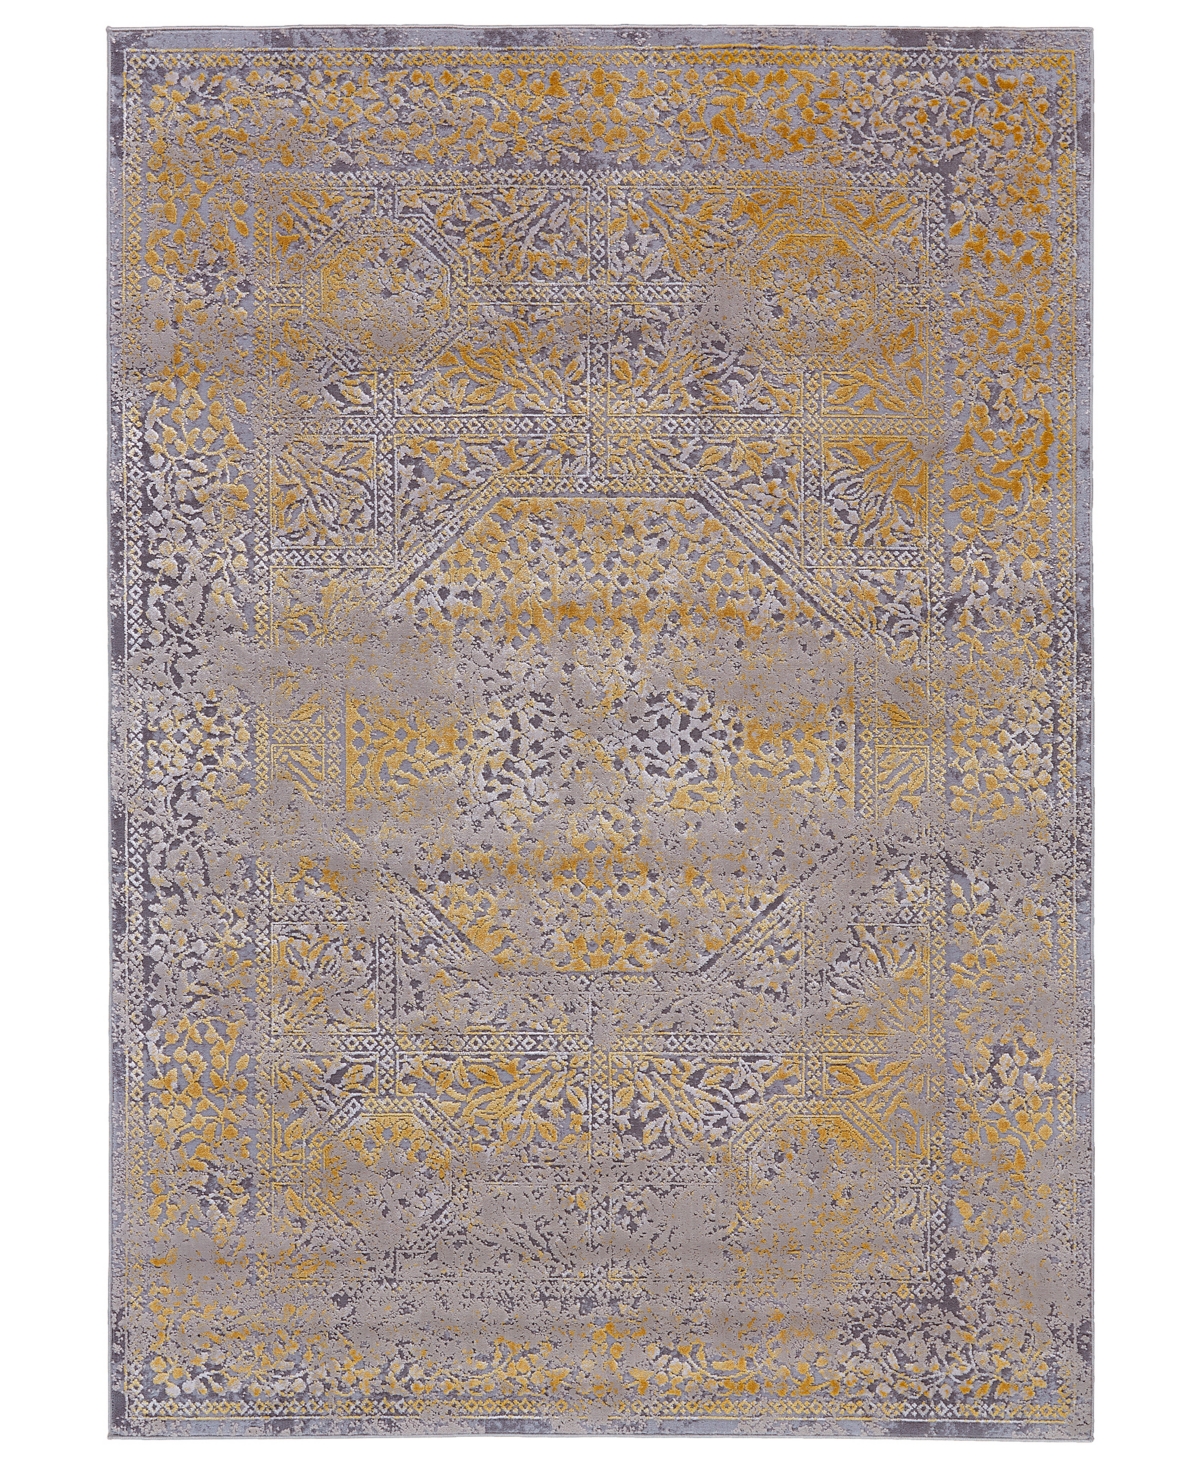 Simply Woven Waldor R3971 5' X 8' Area Rug In Gray,gold-tone